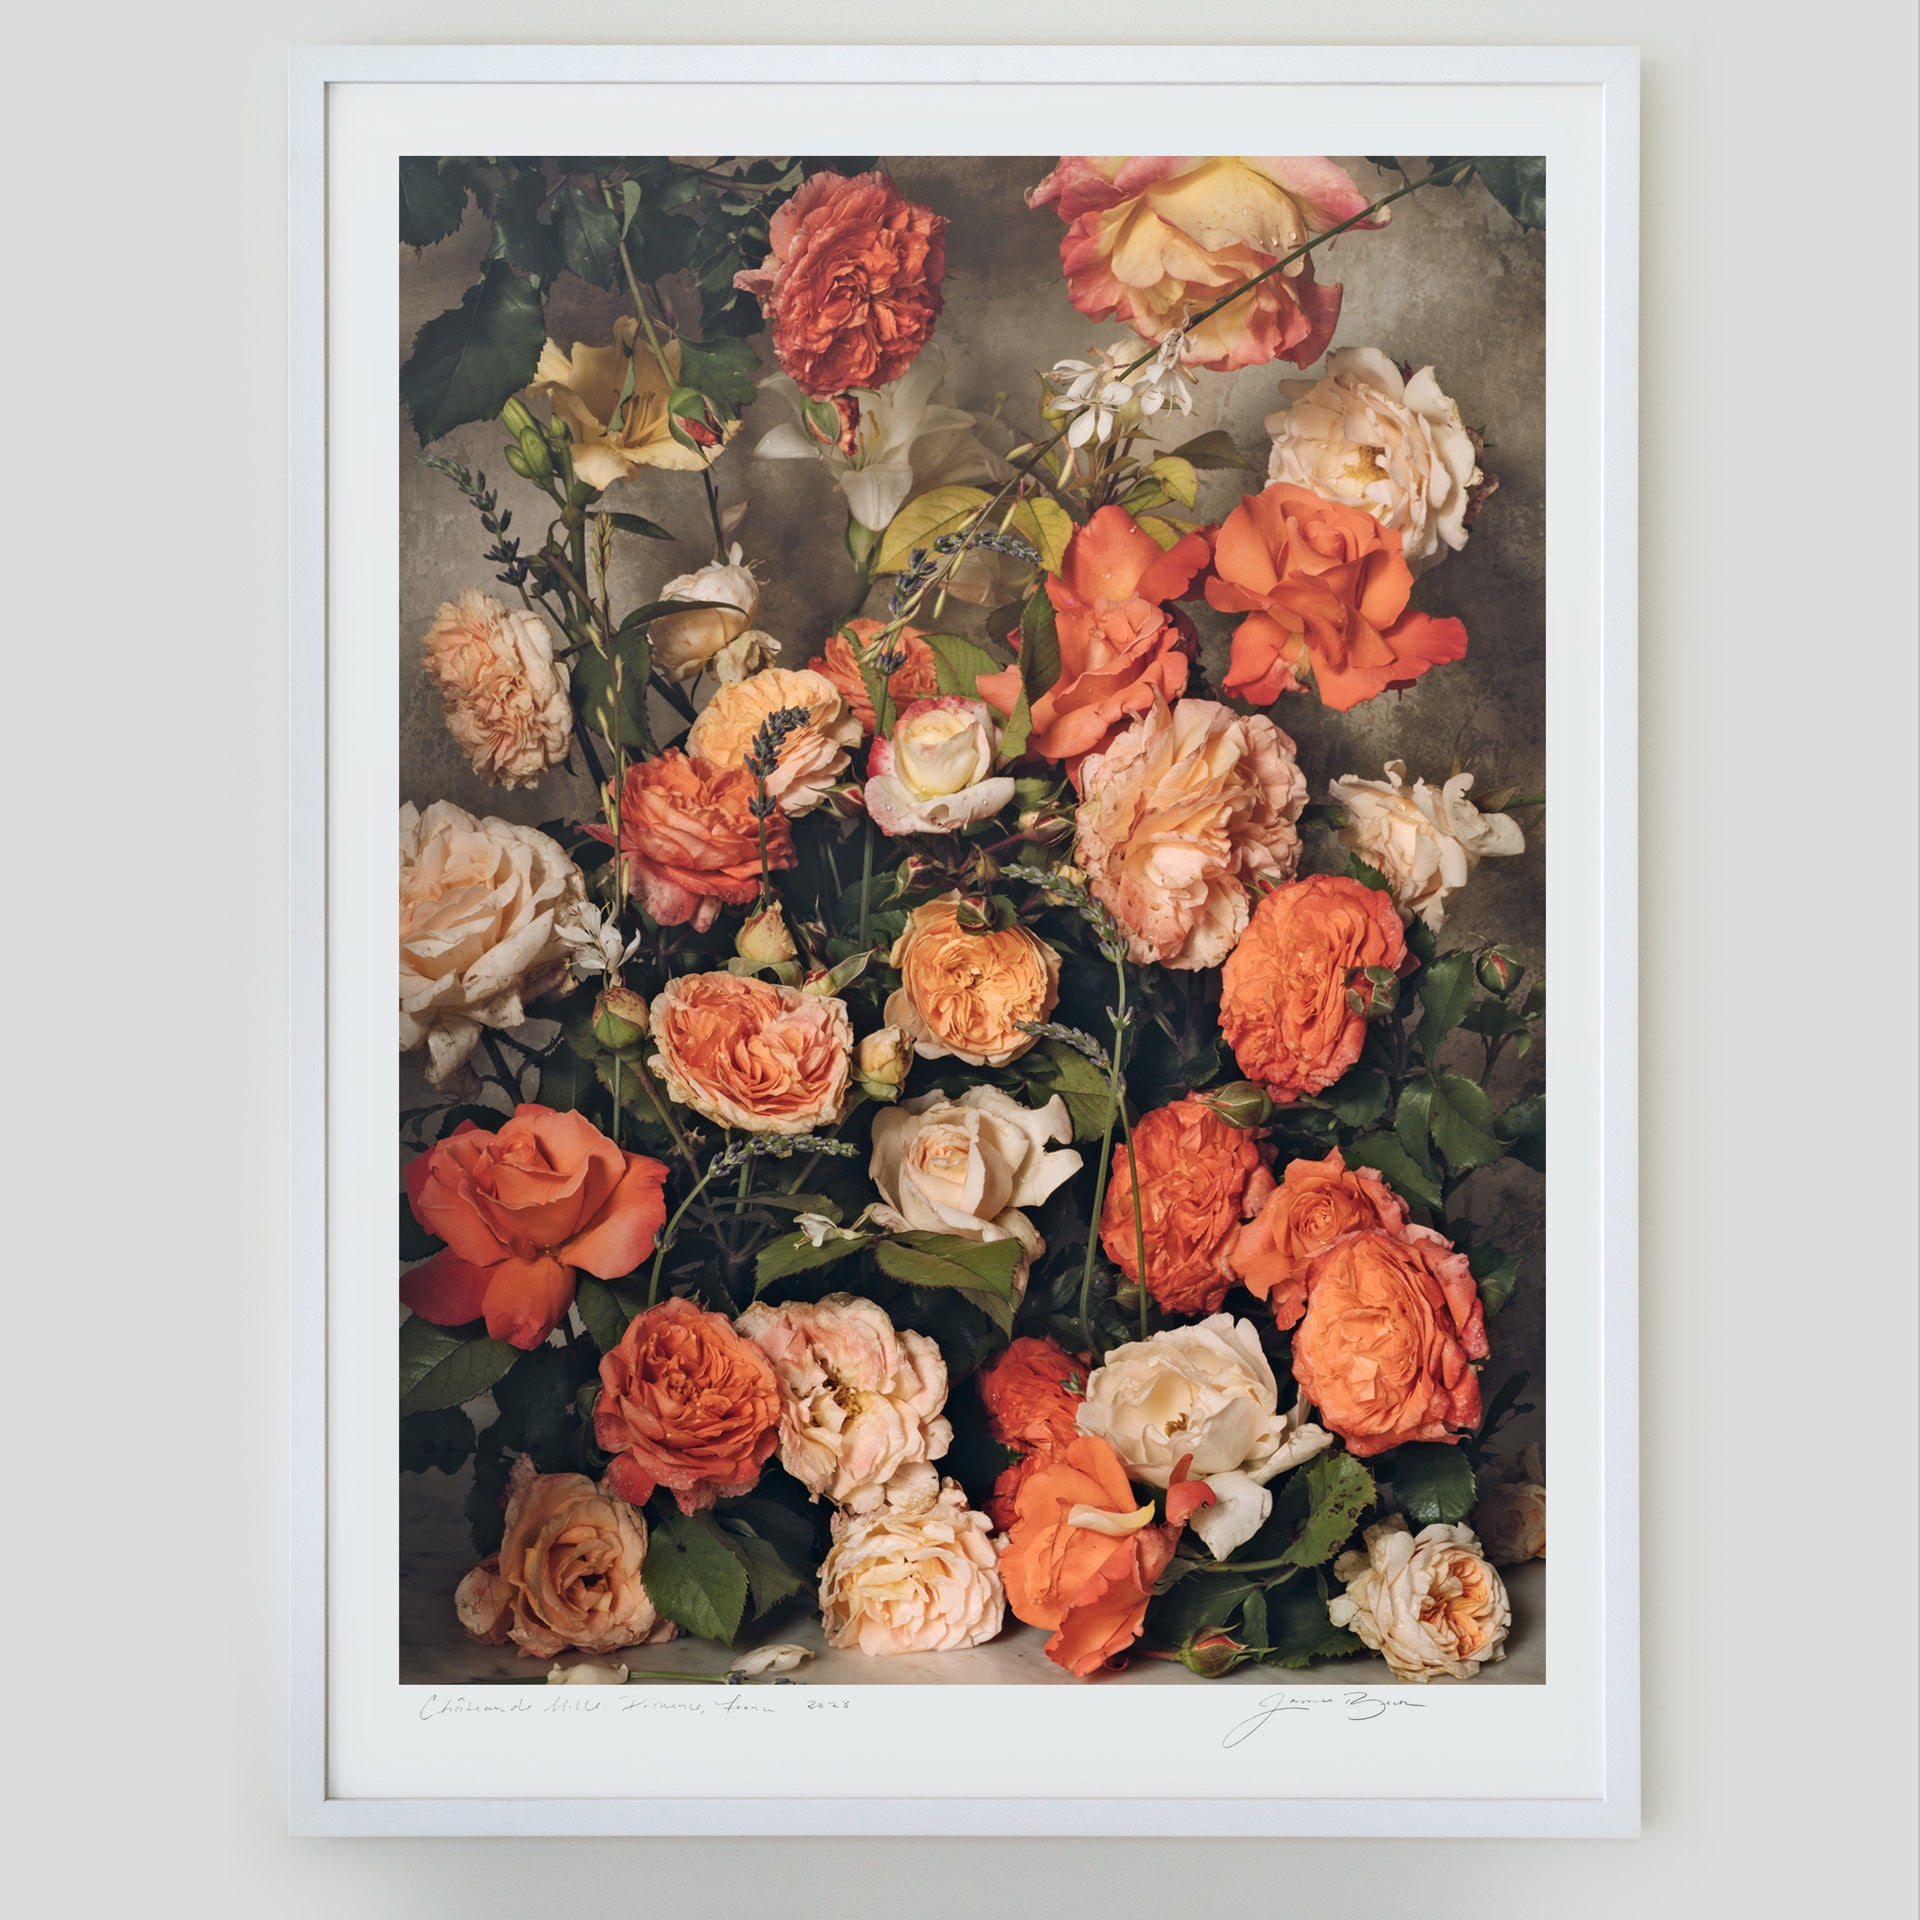 Harvest of Summer's Peach • 1 of 1 Framed Exhibition Piece